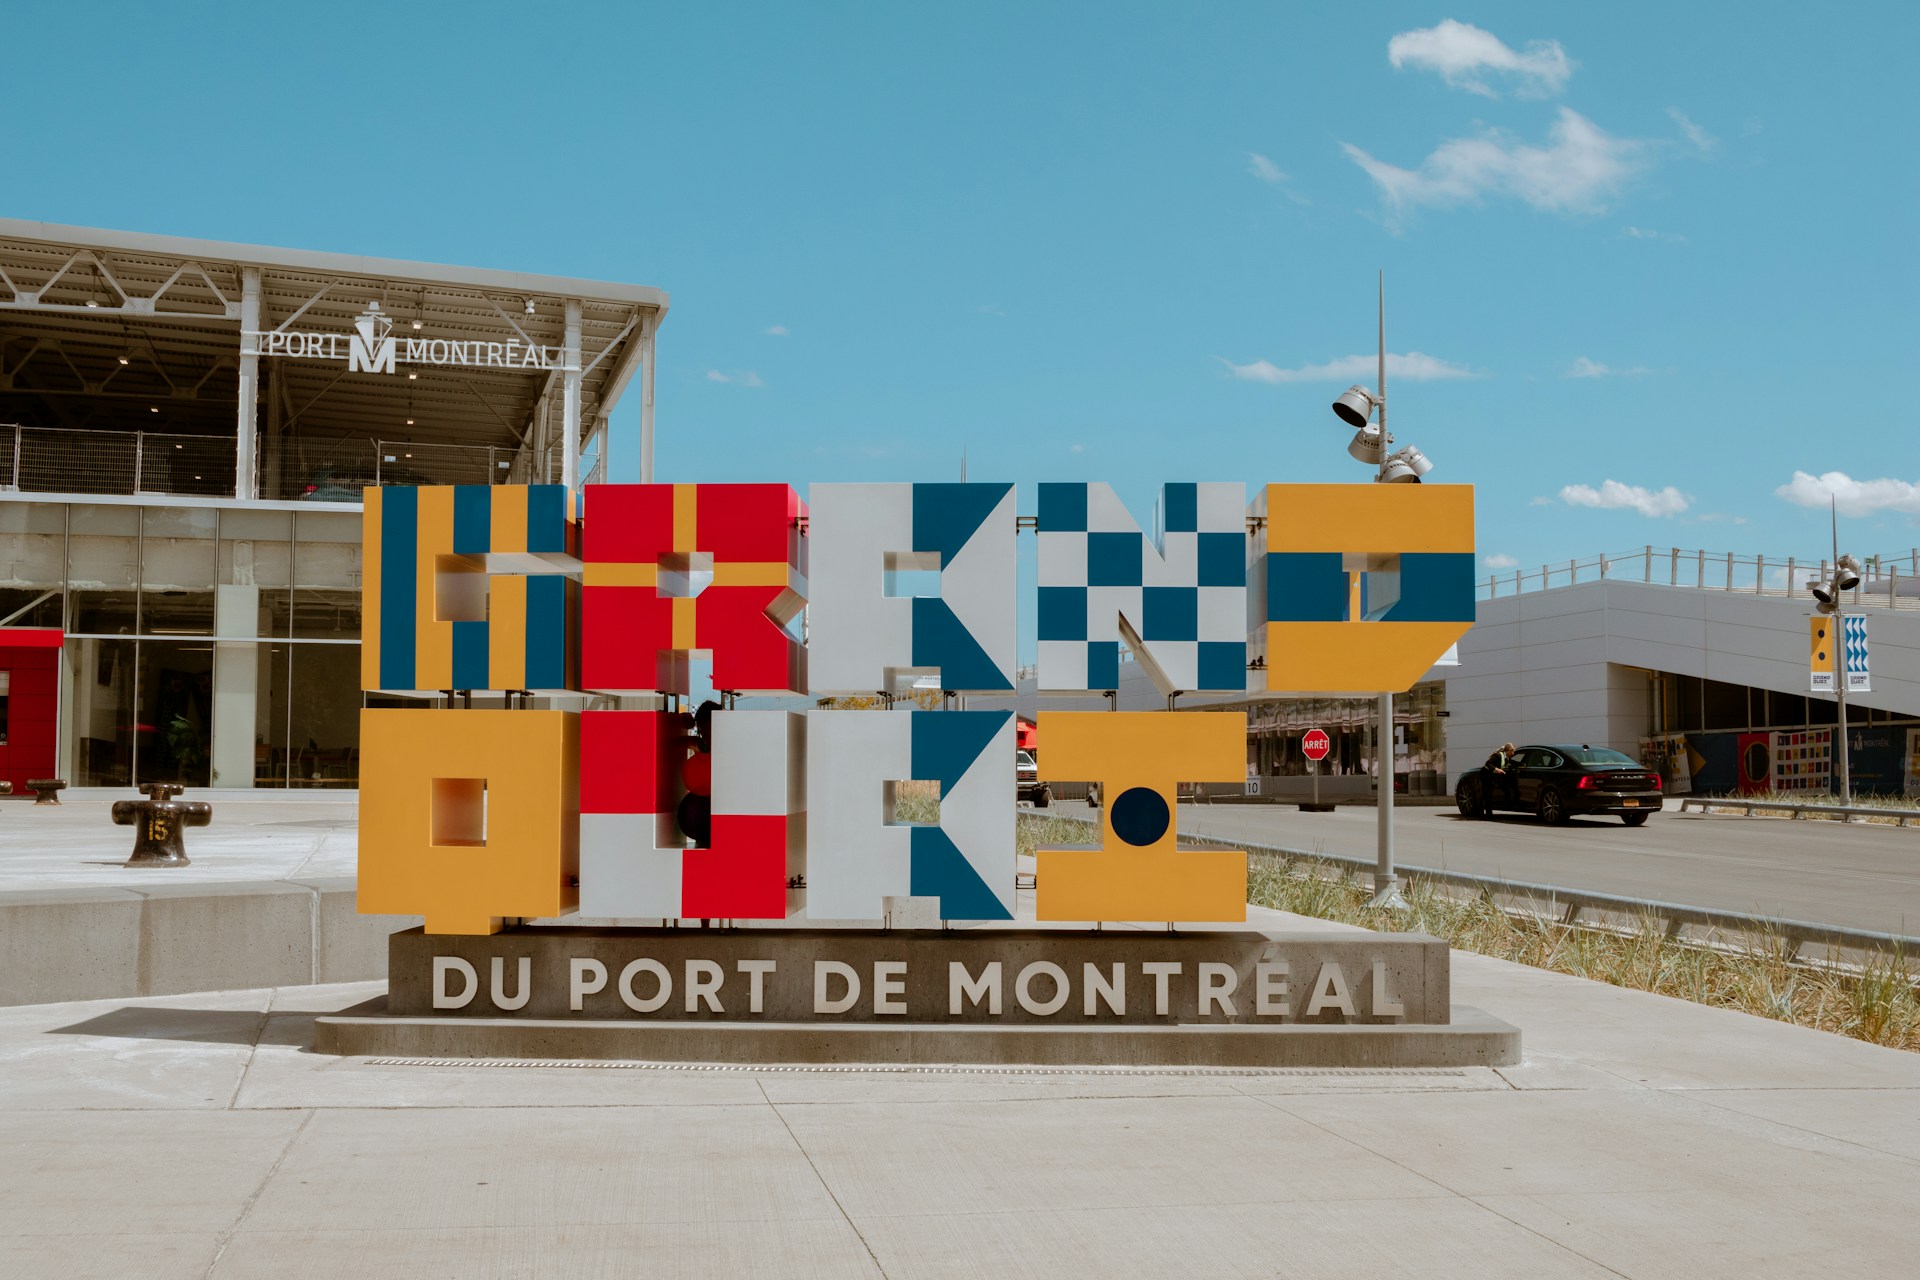 Sign at entrance to the Port of Montreal